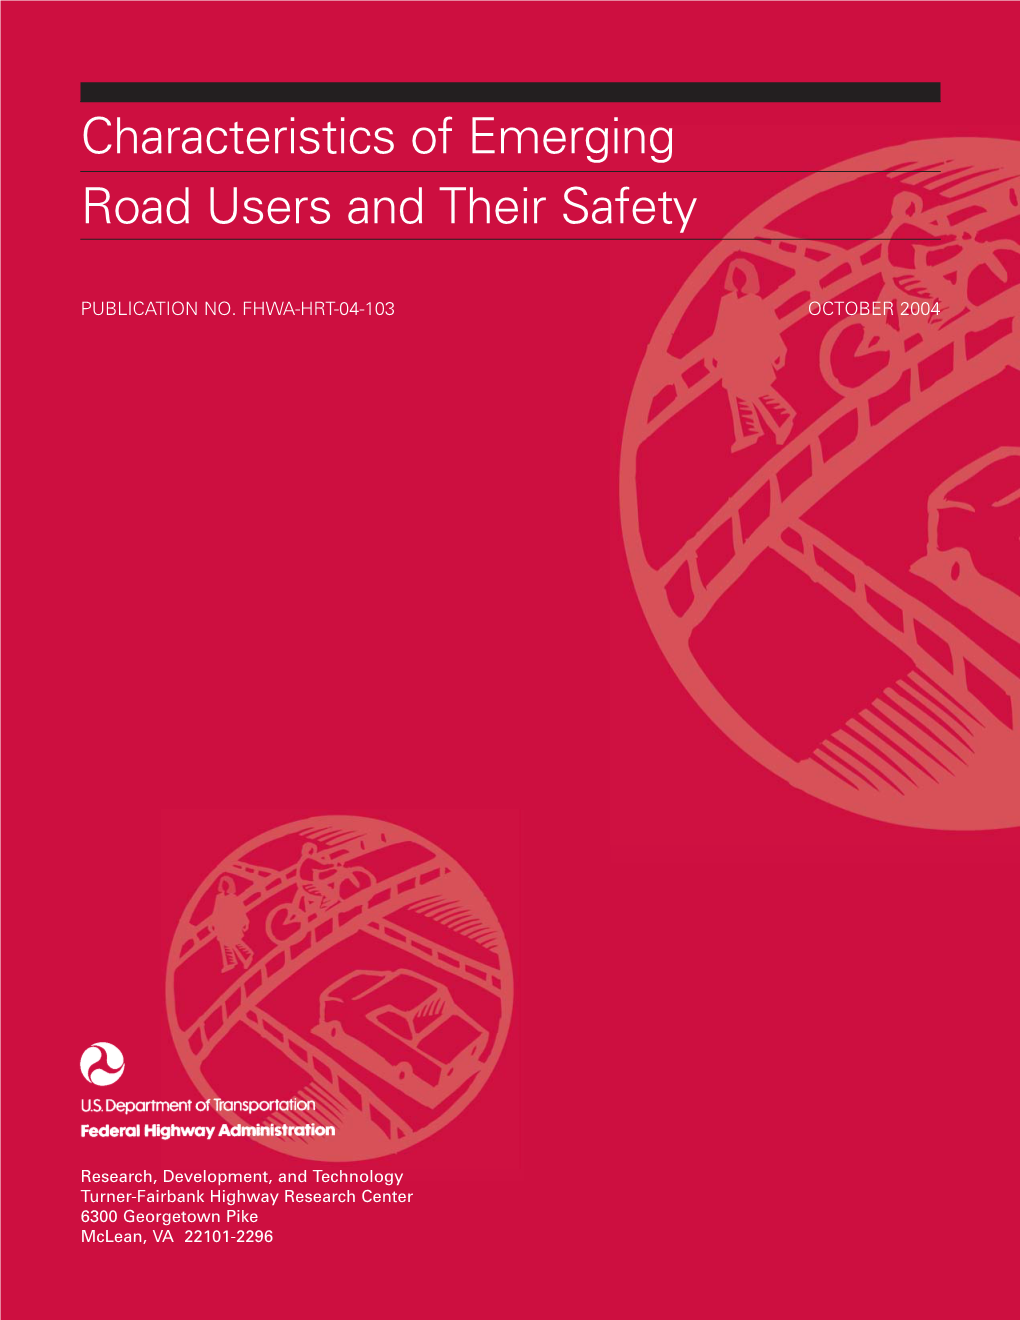 Characteristics of Emerging Road Users and Their Safety